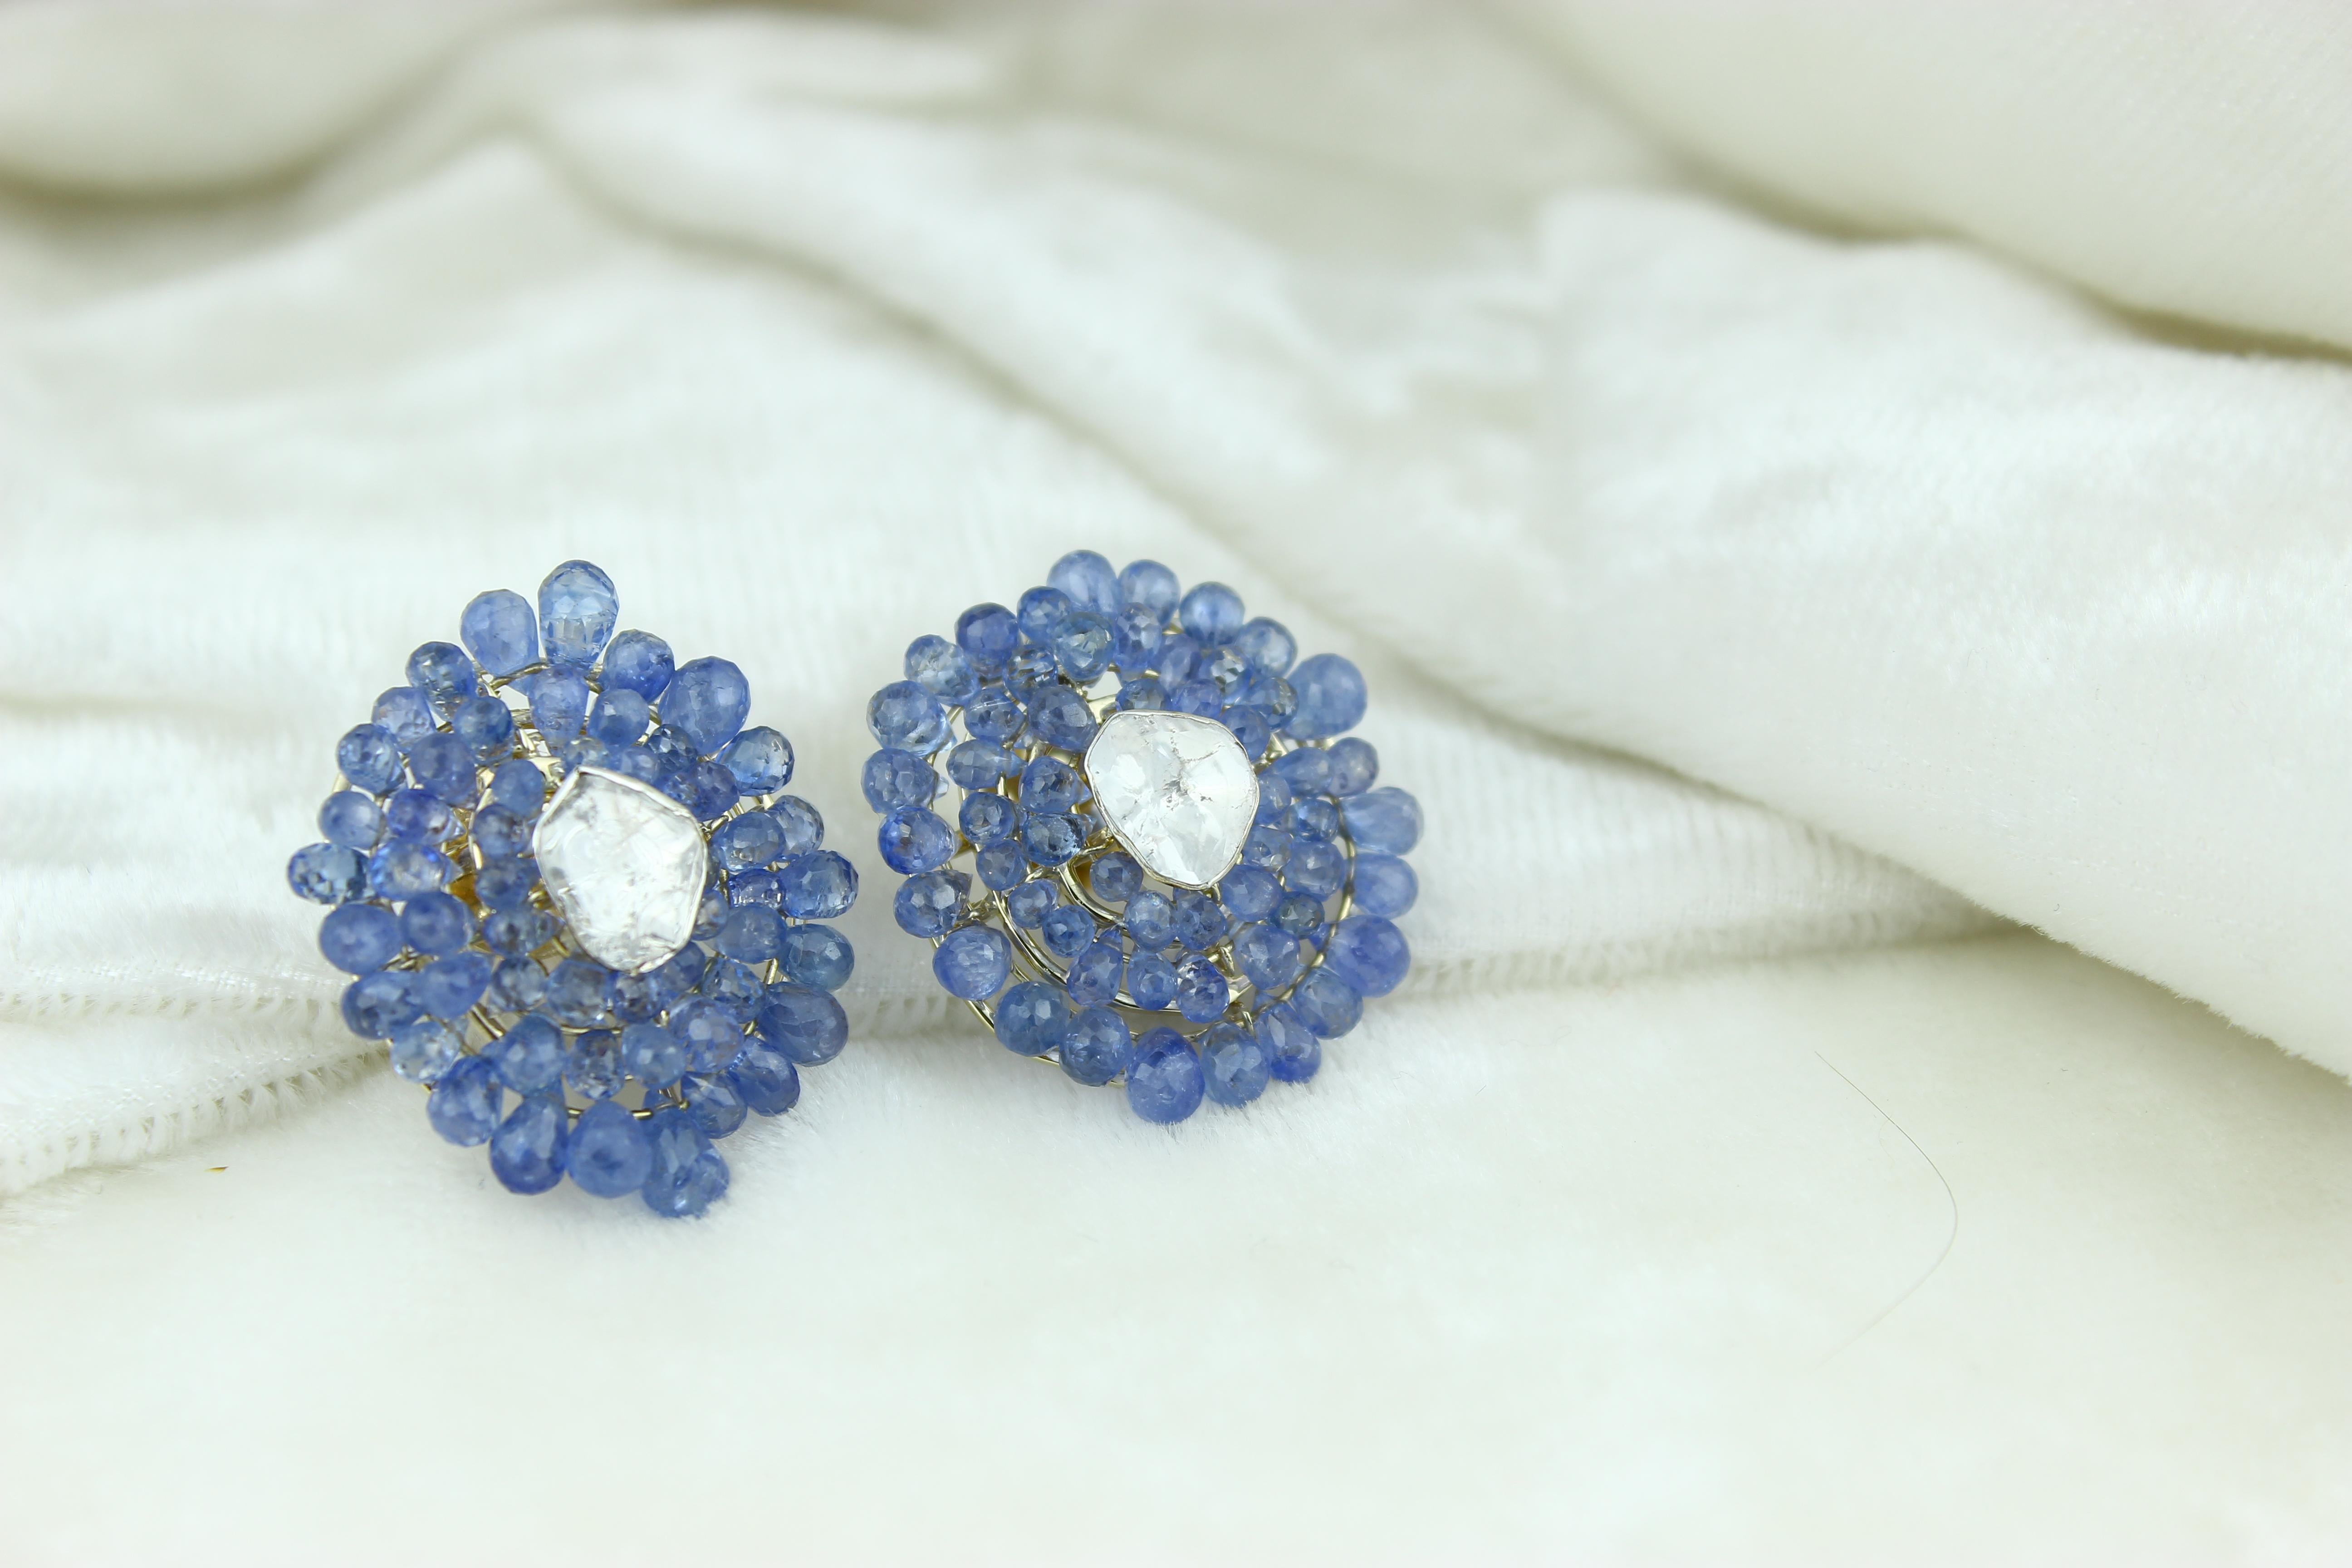 Women's Floral Stud Polki Earrings with Blue Briolletes Gemstone set in 18k Solid Gold For Sale